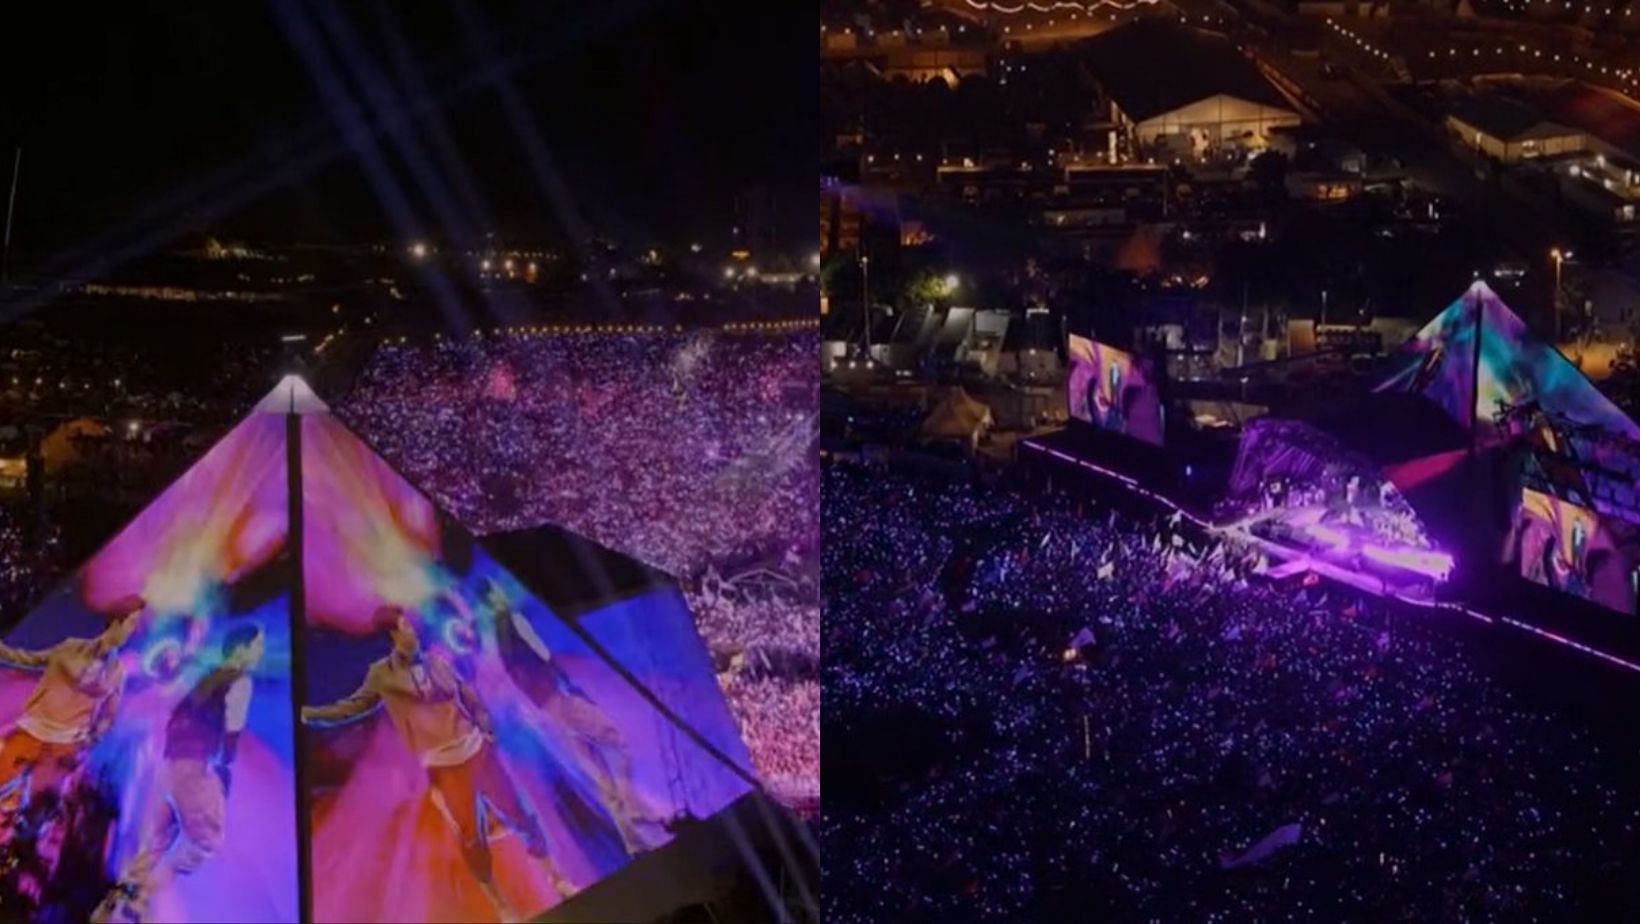 Coldplay sends love to BTS during &lsquo;My Universe&rsquo; performance at Glastonbury Festival. (Images via X/@coldplayxtra)